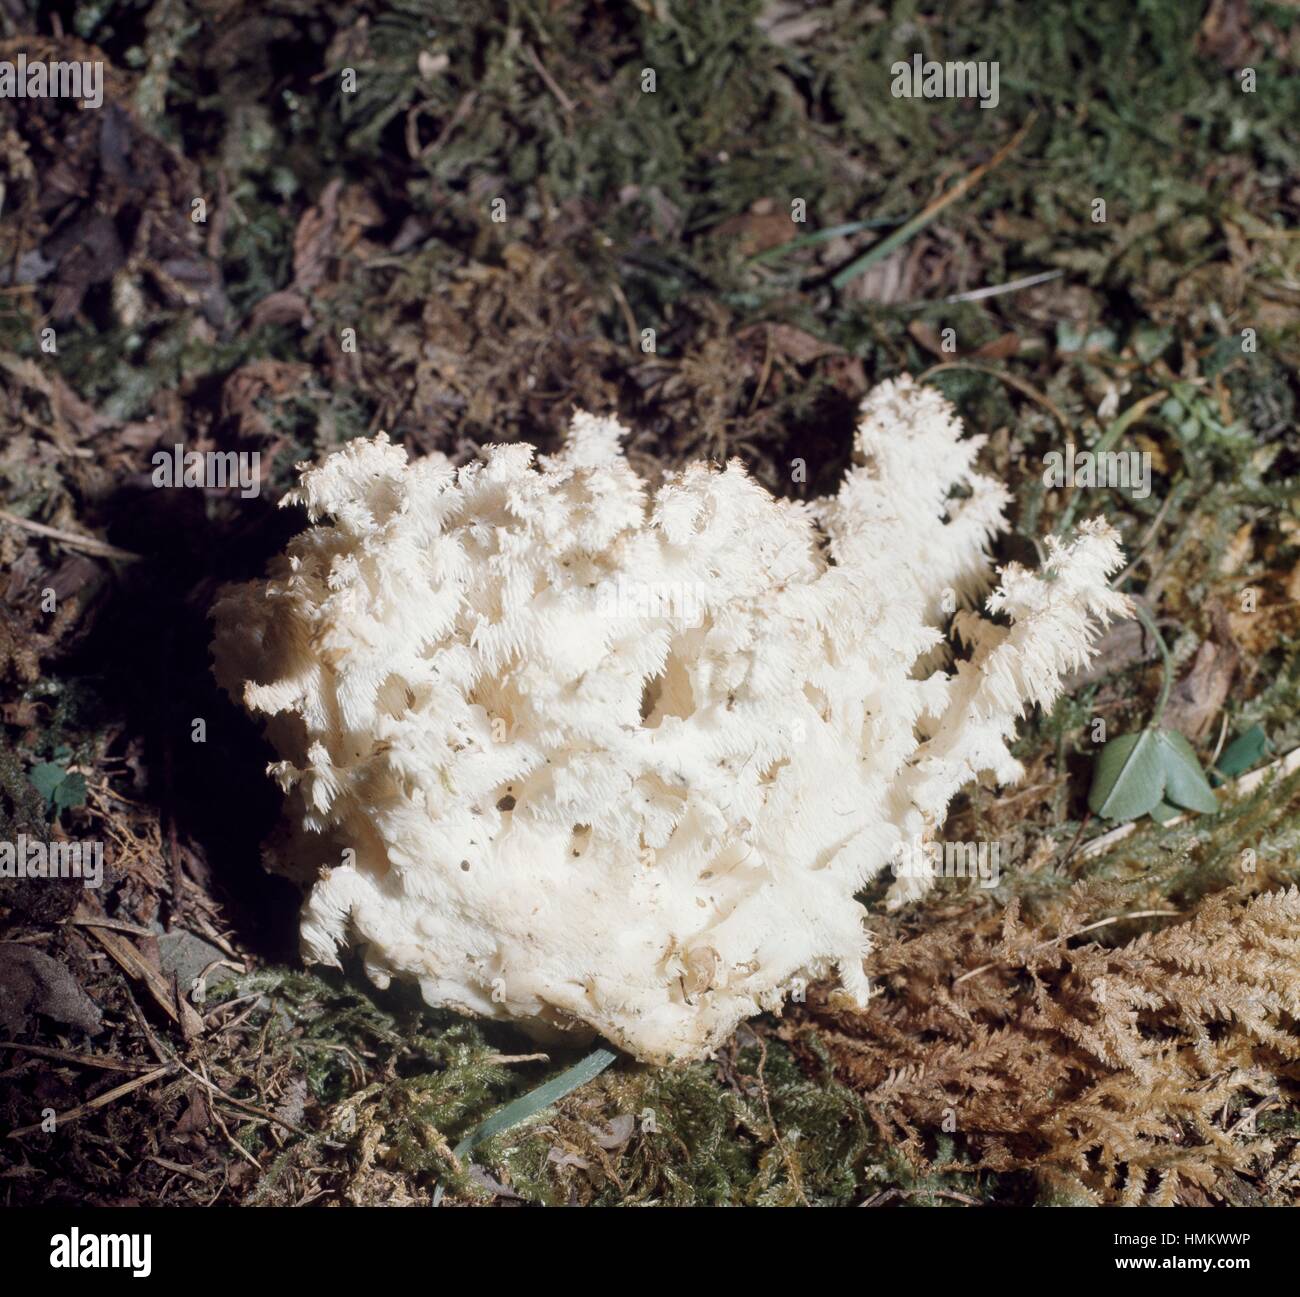 Bears tooth mushroom, Bears head tooth, Comb tooth or Coral tooth (Hericium coralloides), Hericiaceae. Stock Photo